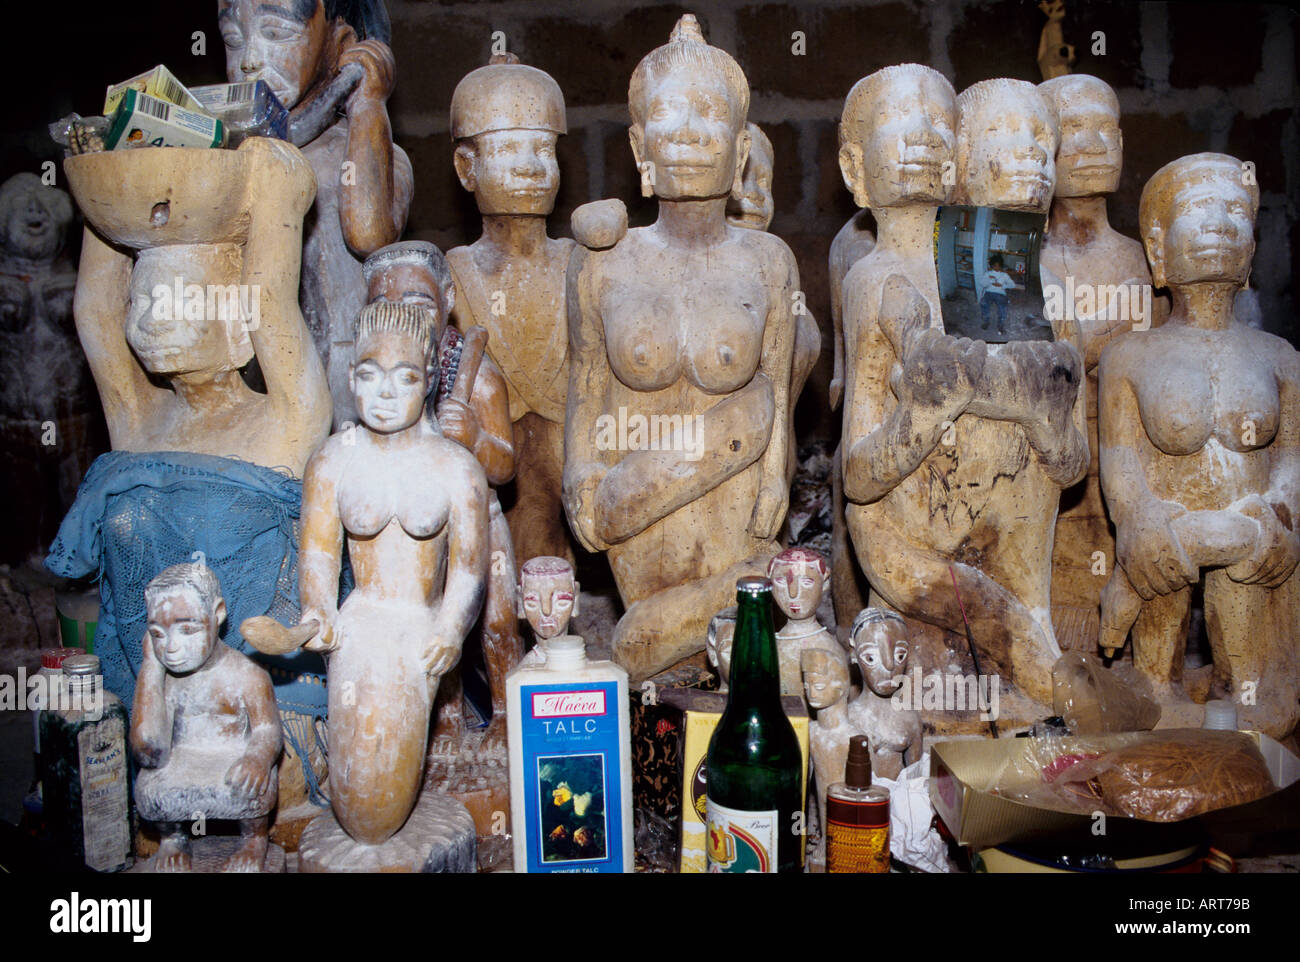 A Mami Wata altar in the Mono district of Benin Ein Mami Wata Altar in der Provinz Mono Benin  Stock Photo